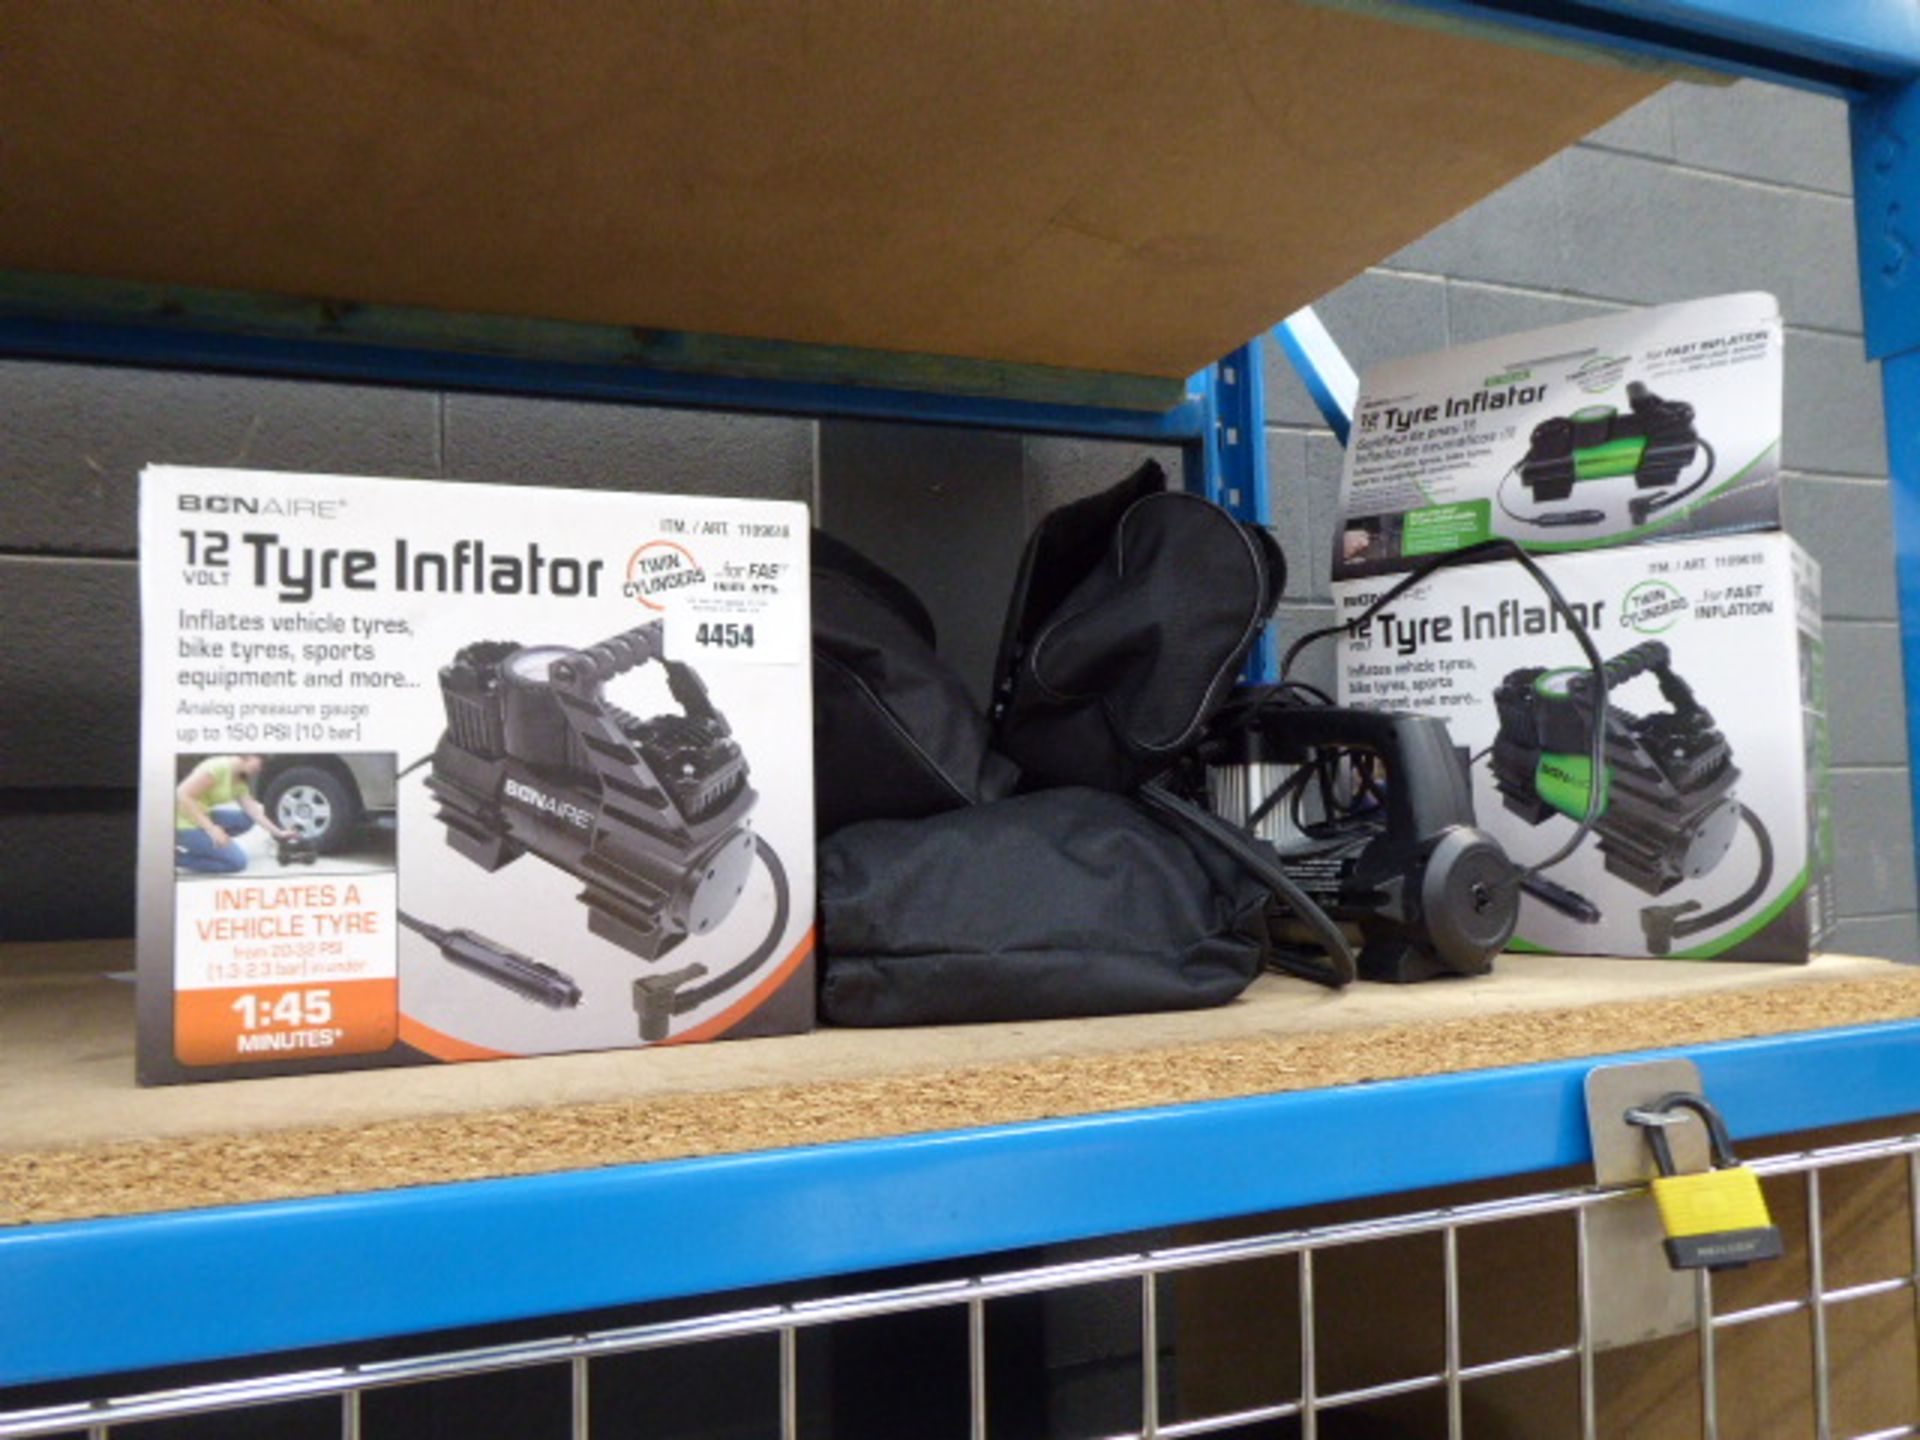 2 boxed and 4 unboxed tyre inflators